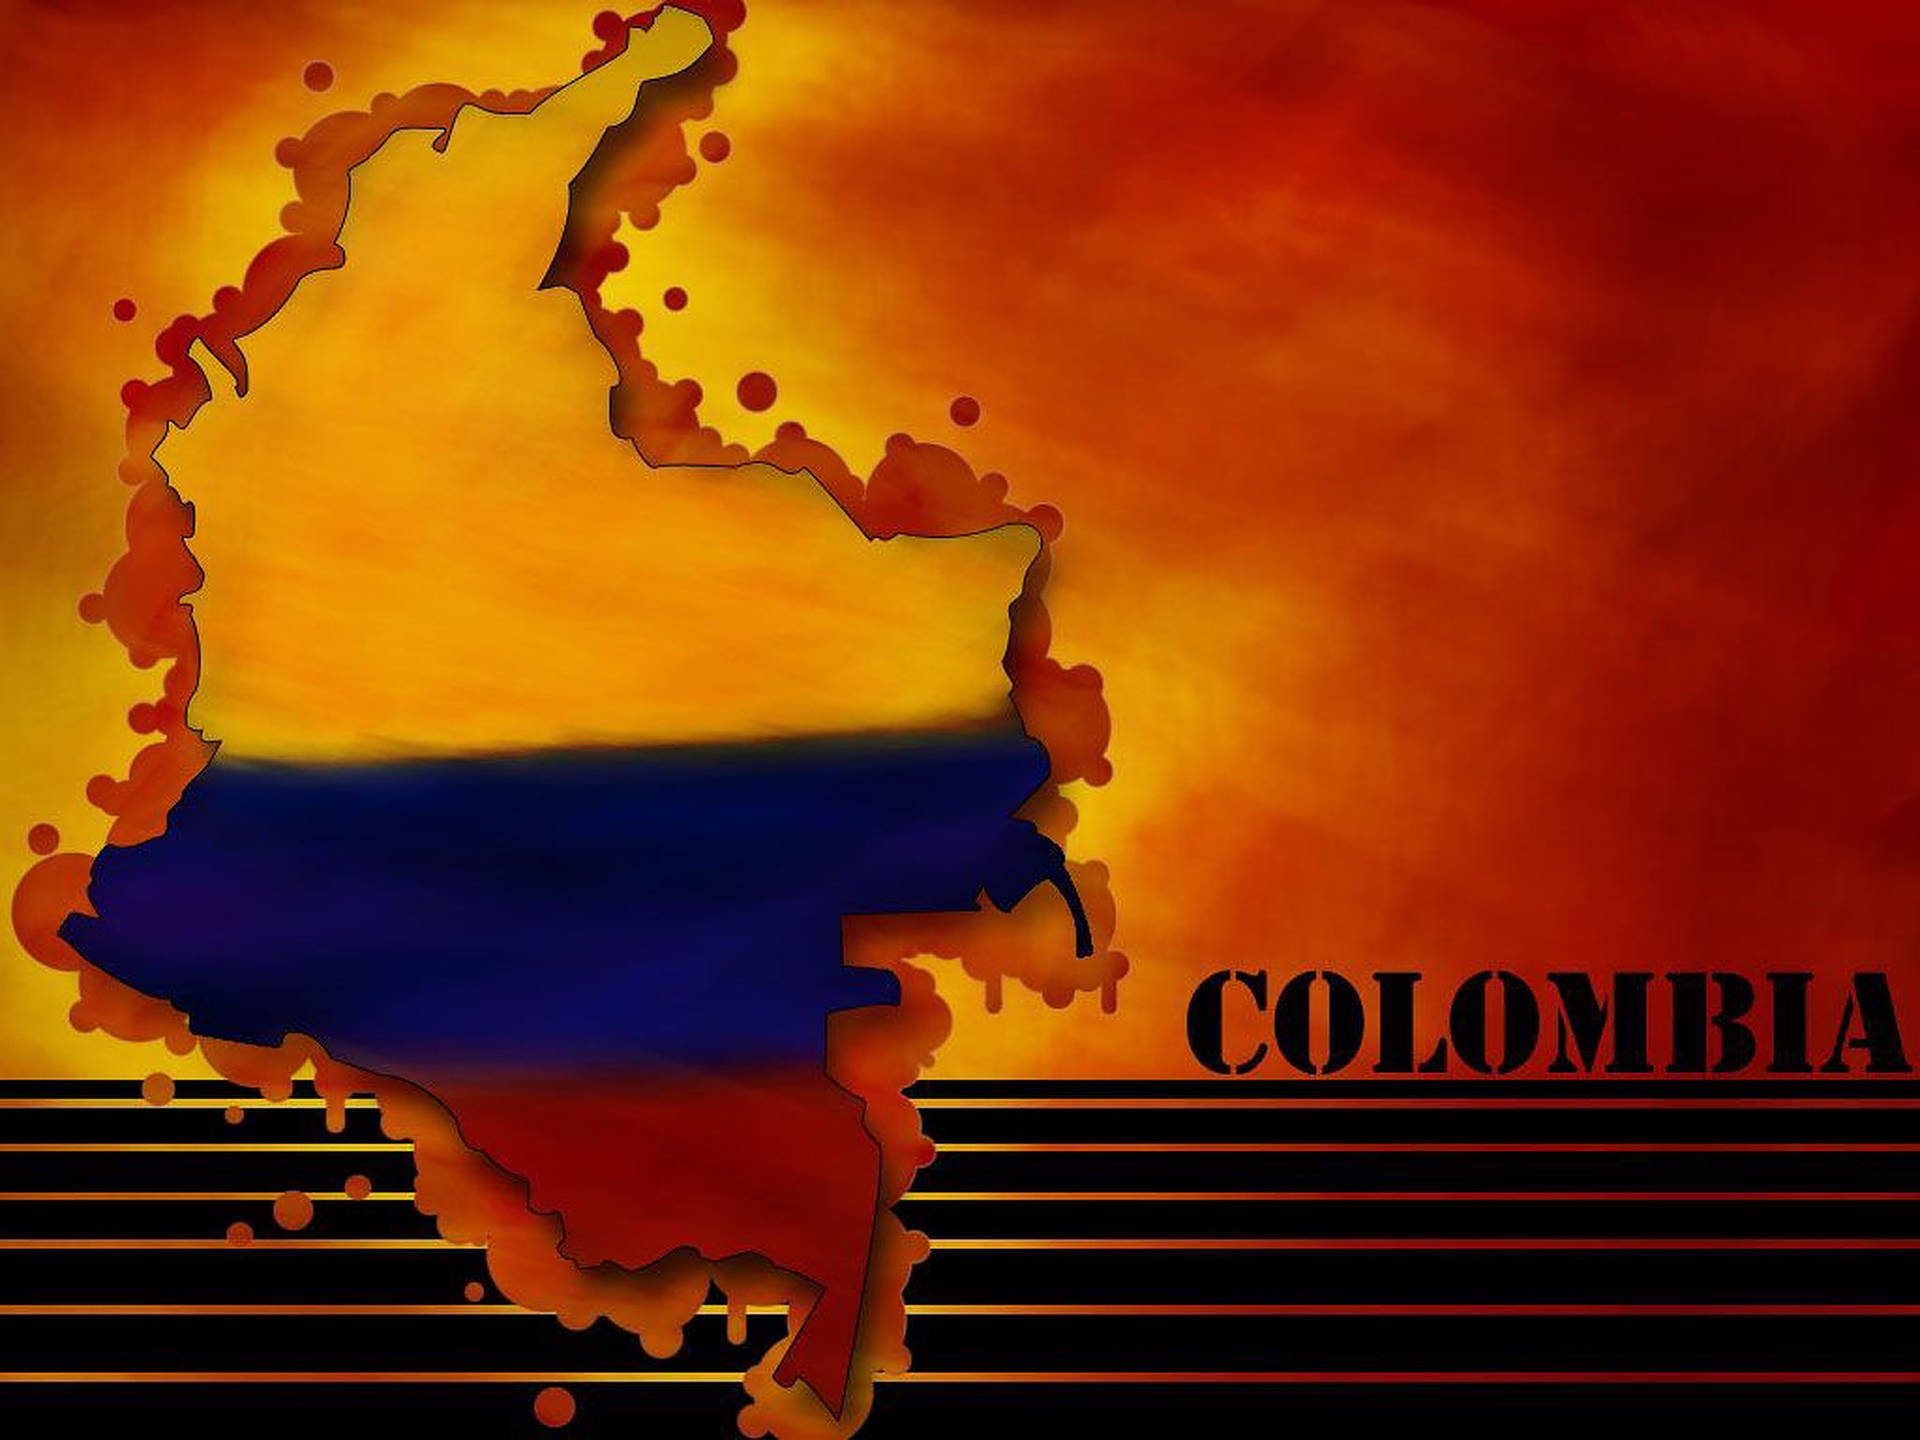 Download Colombia wallpapers for mobile phone free Colombia HD pictures